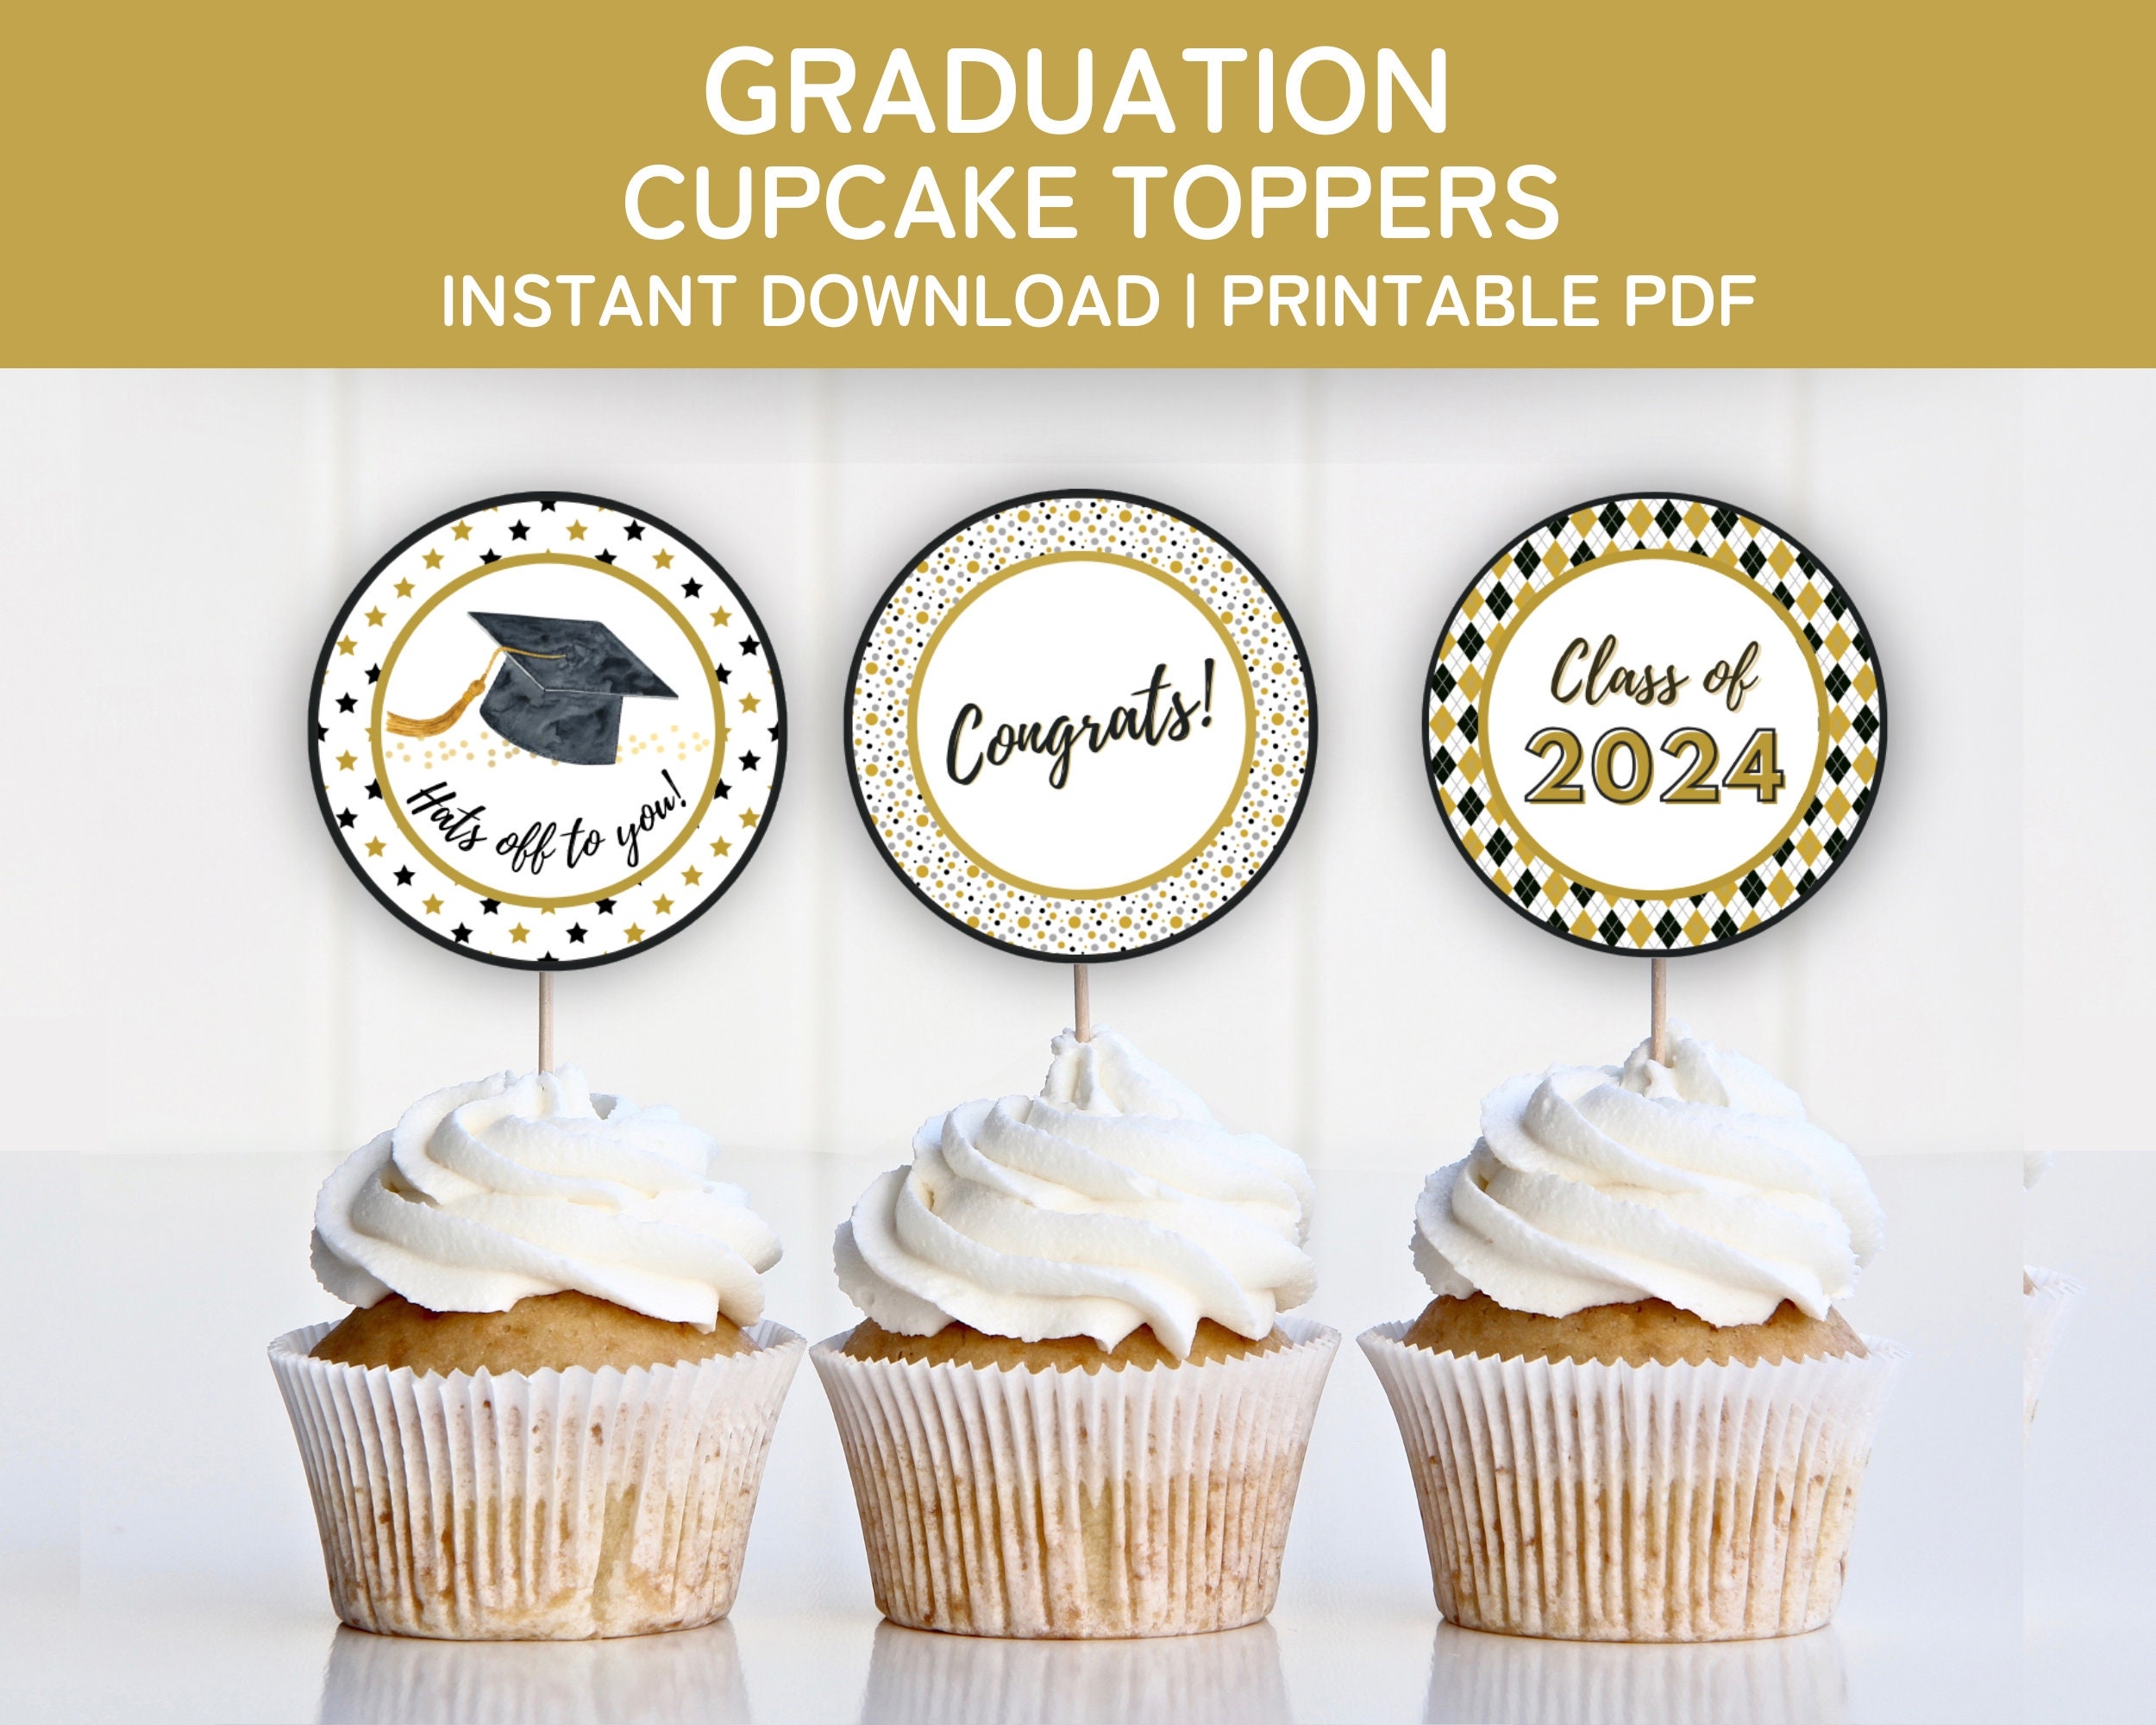 Printable Graduation Cupcake Toppers 2024 Graduation Party Decorations Class Of 2024 Print And Cut Graduation Cupcake Toppers Etsy